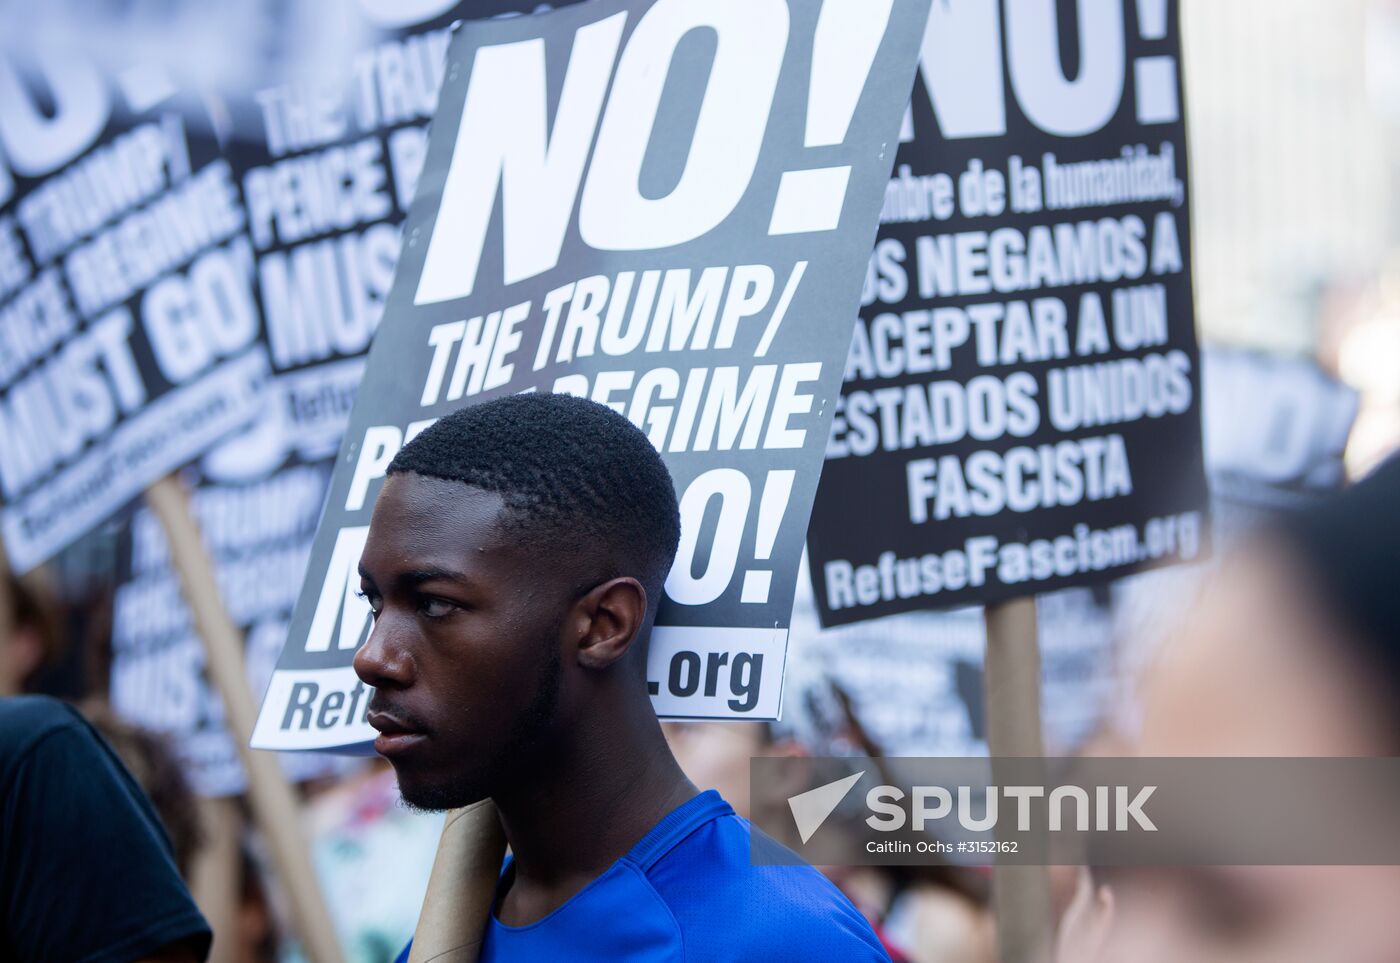 Protest against Donald Trump in the United States of America